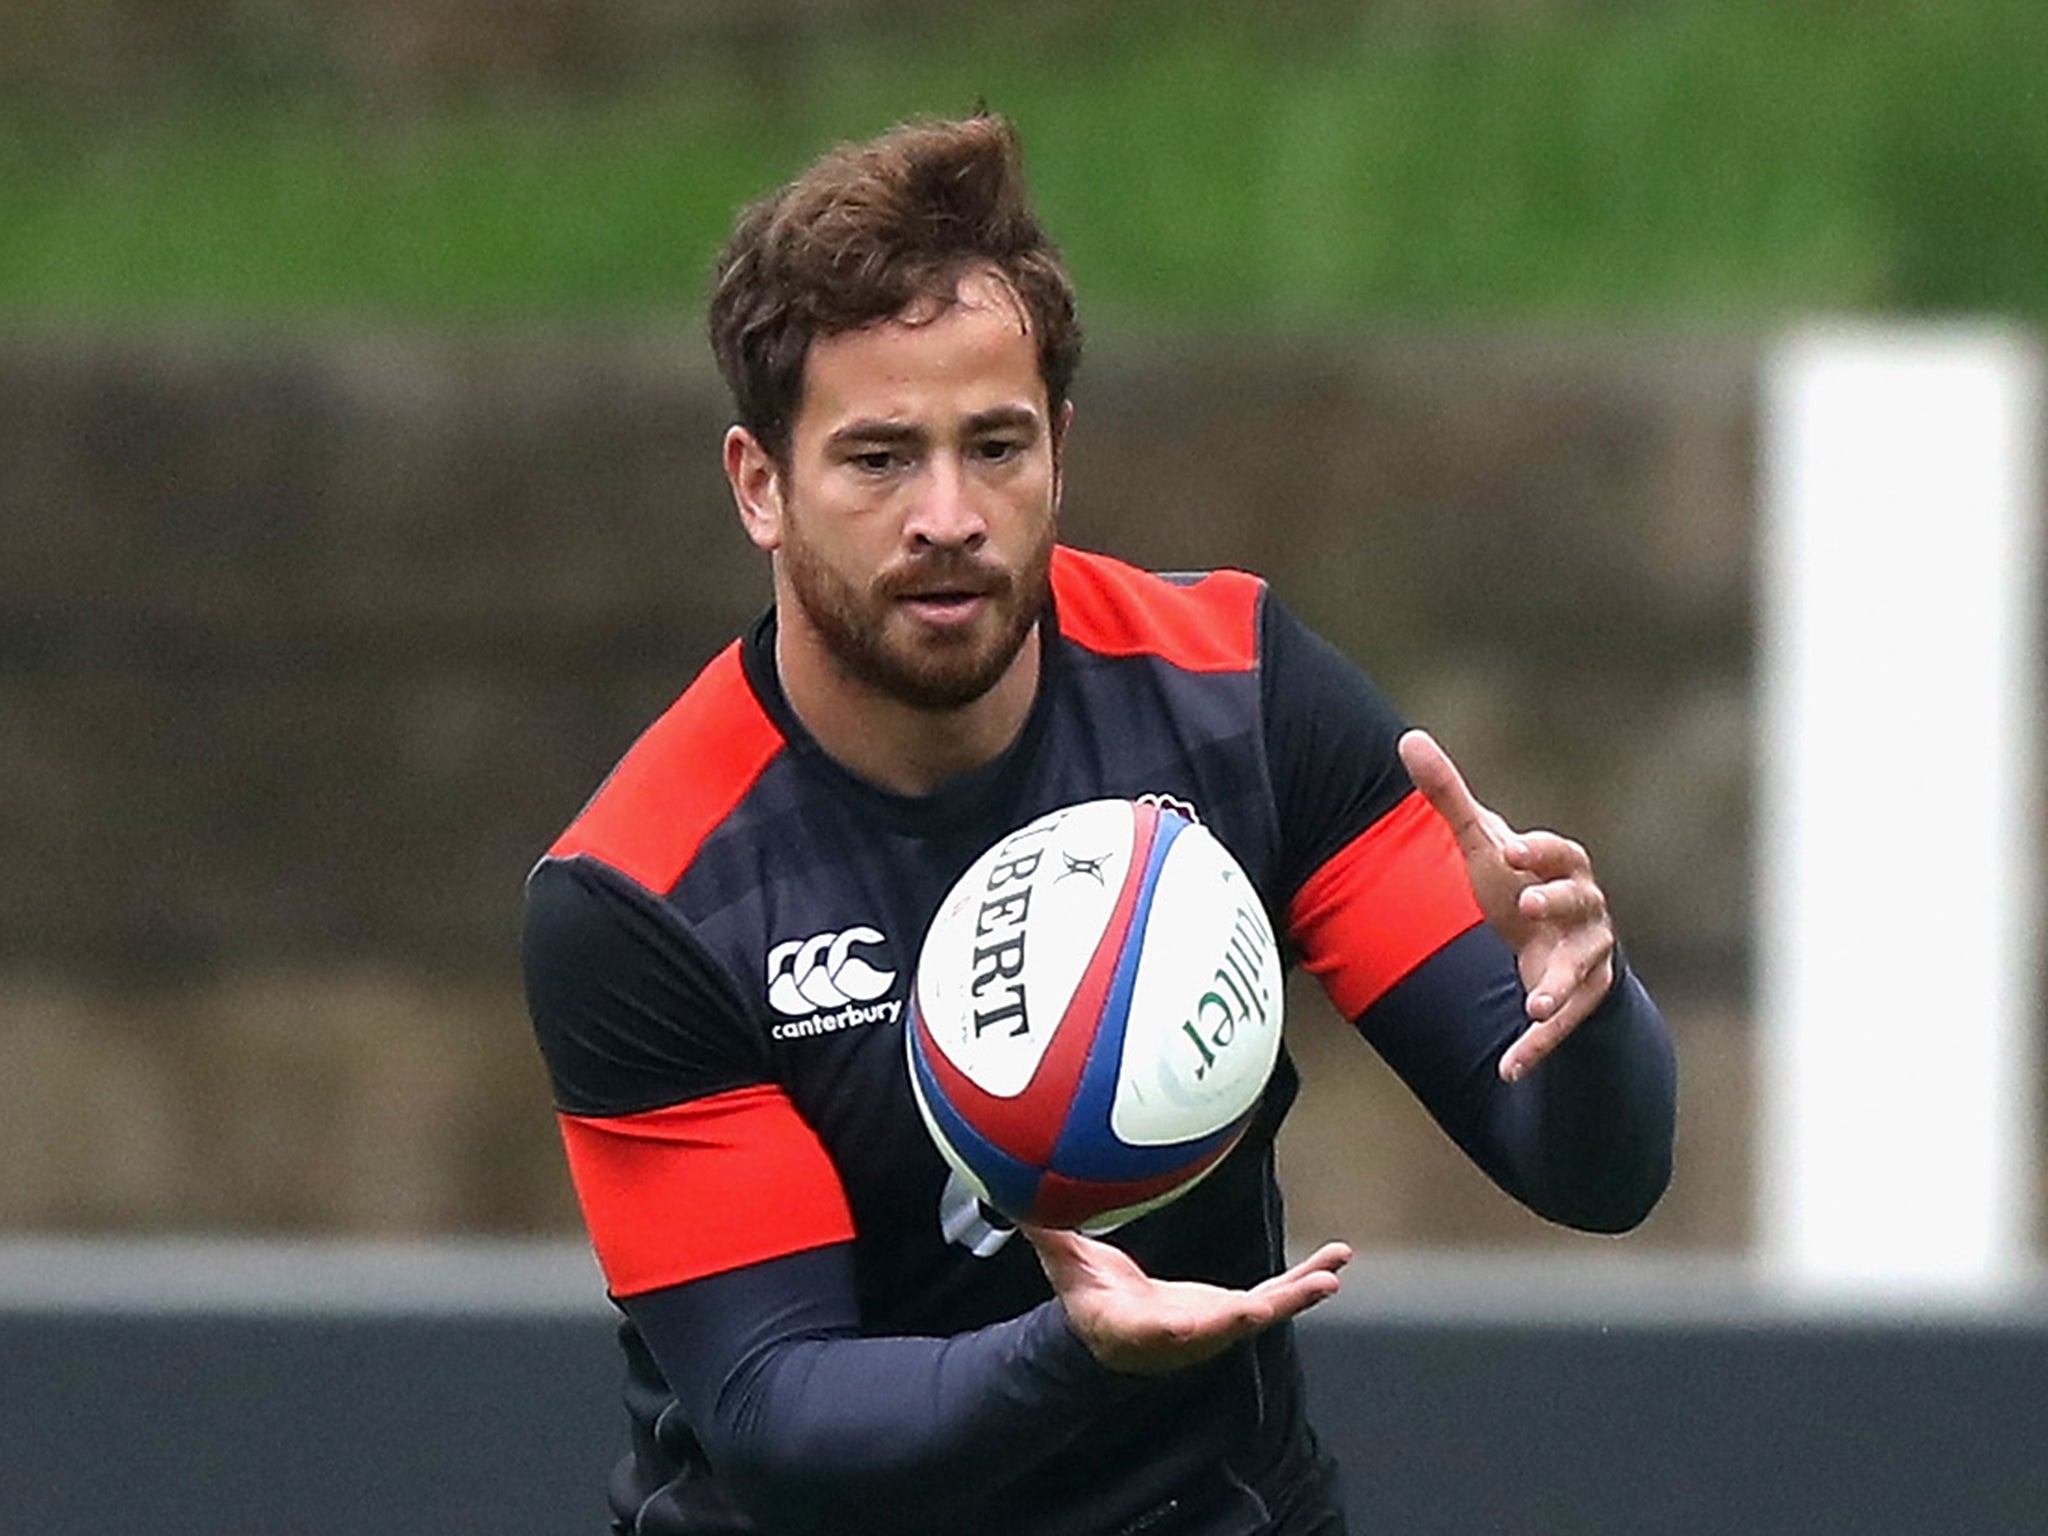 Cipriani will make his first England appearance in three years